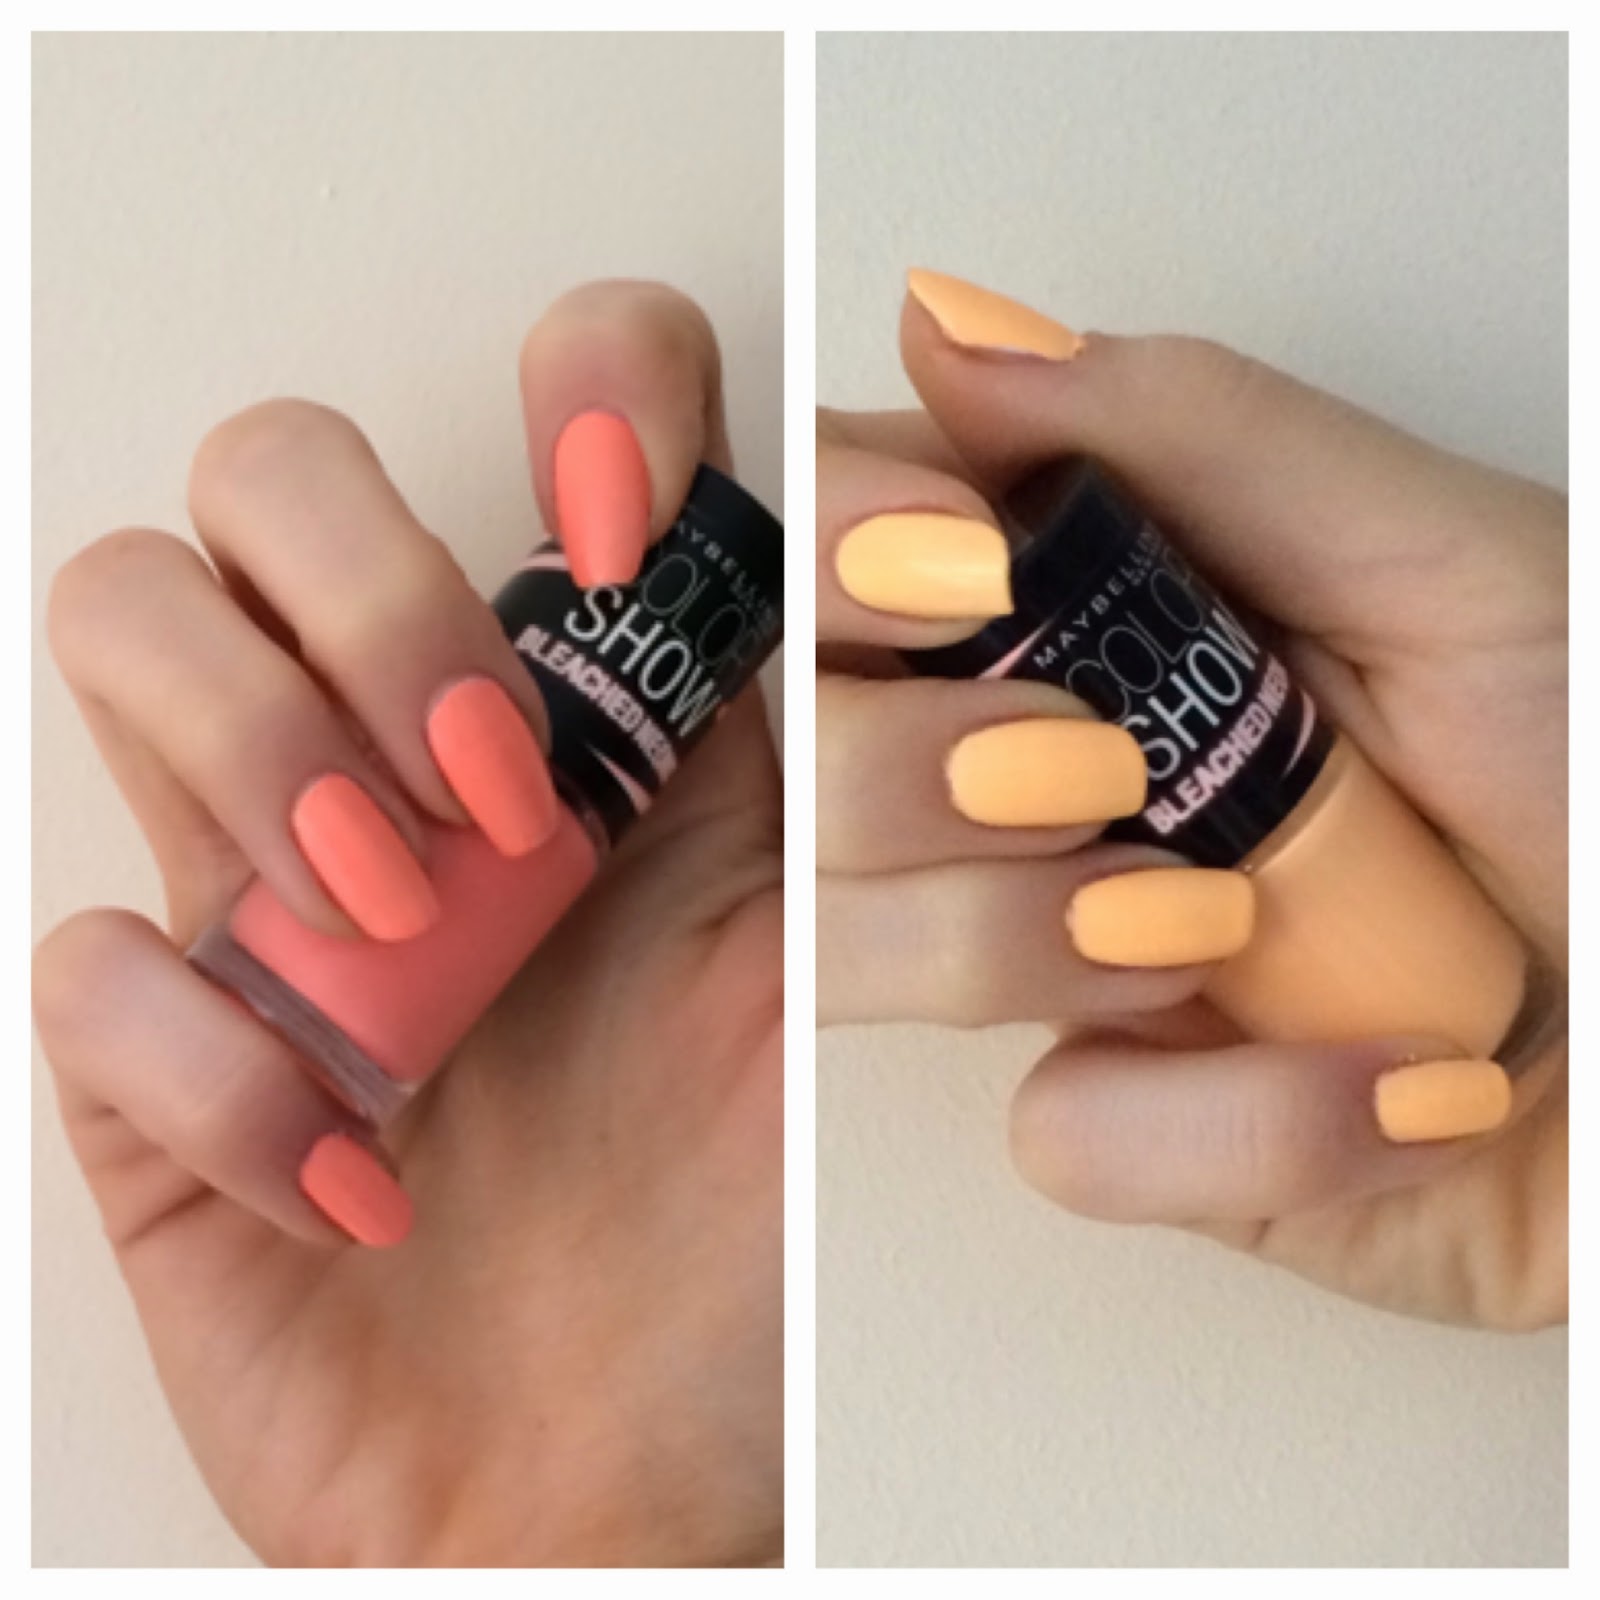 maybelline-bleached-neons-color-show-nail-polish-review